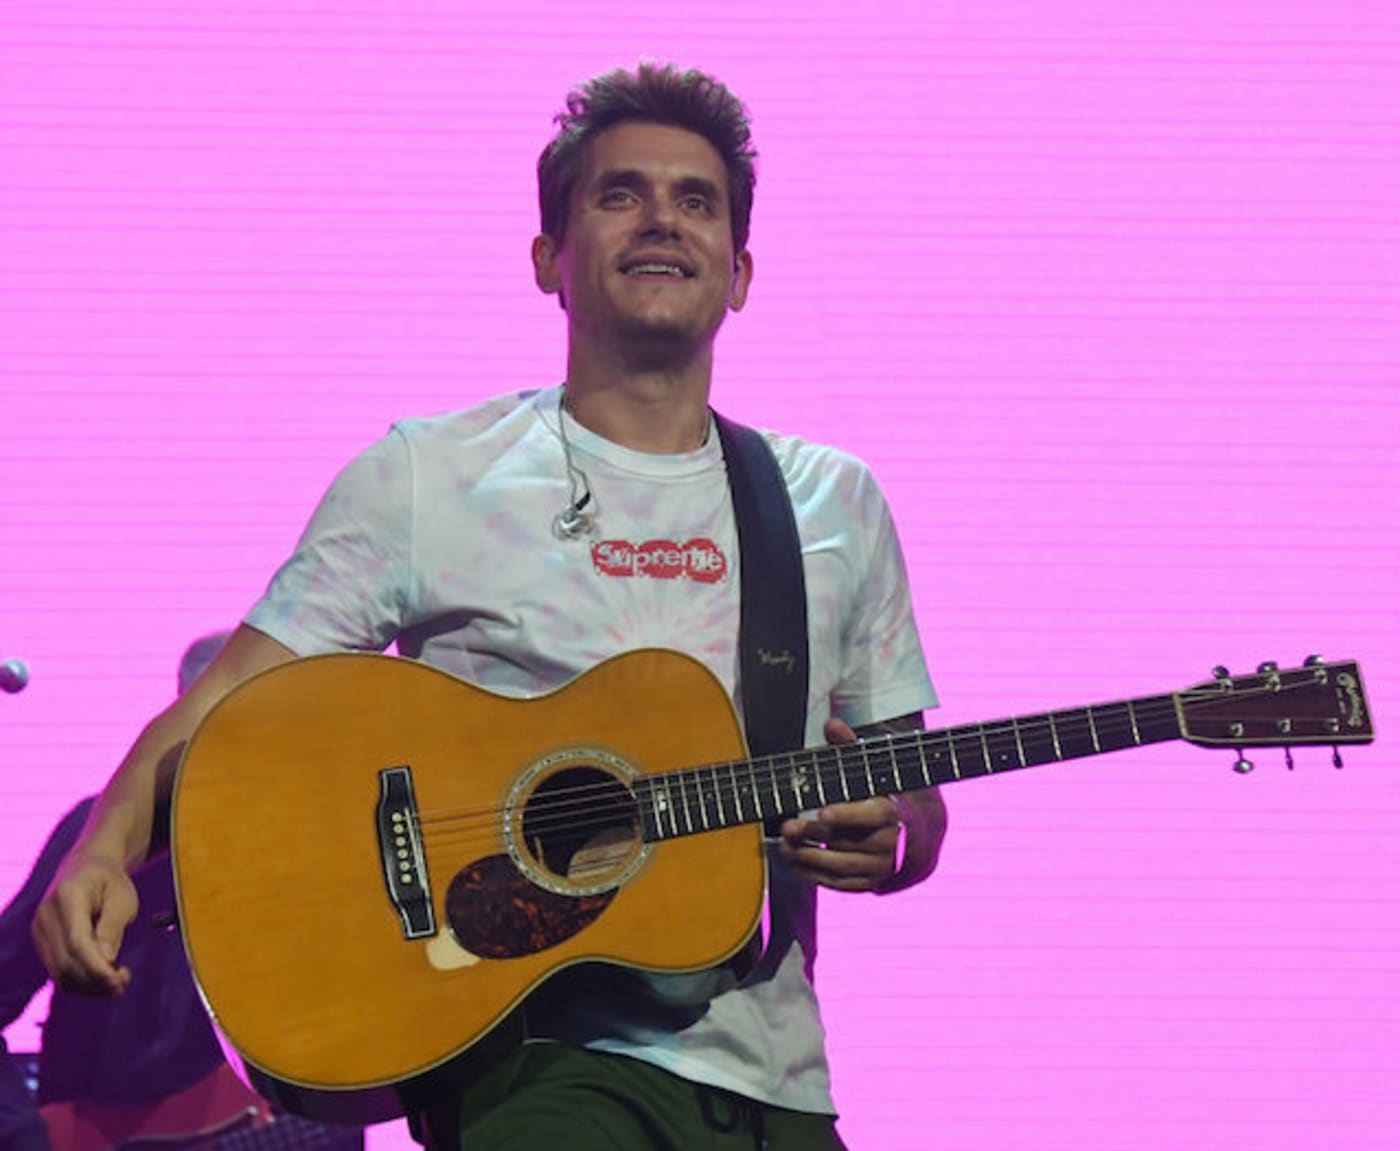 This is a picture of John Mayer.